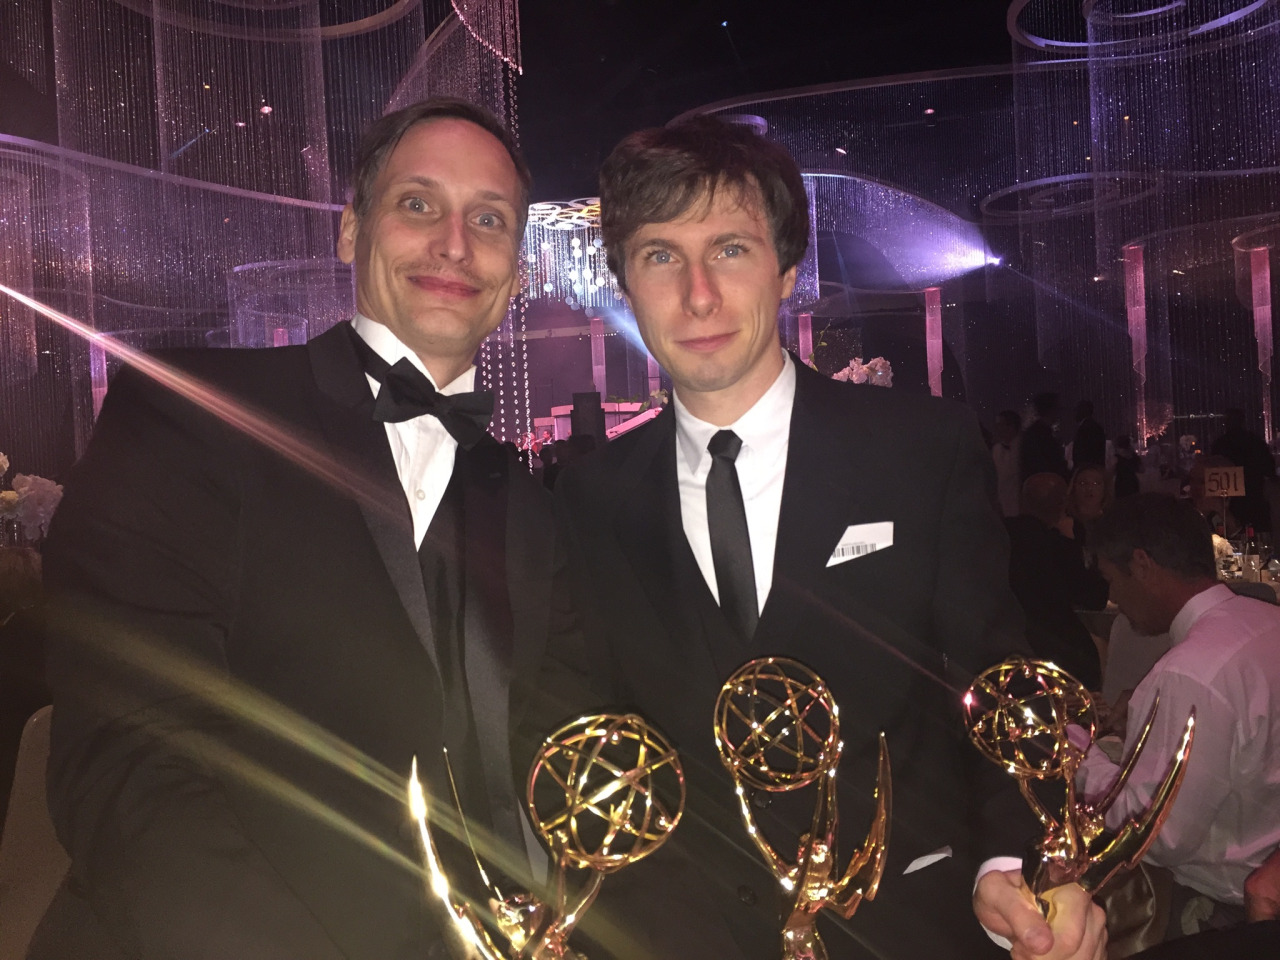 Nick Cross (left) and Patrick McHale with their Emmys for "Over the Garden Wall."